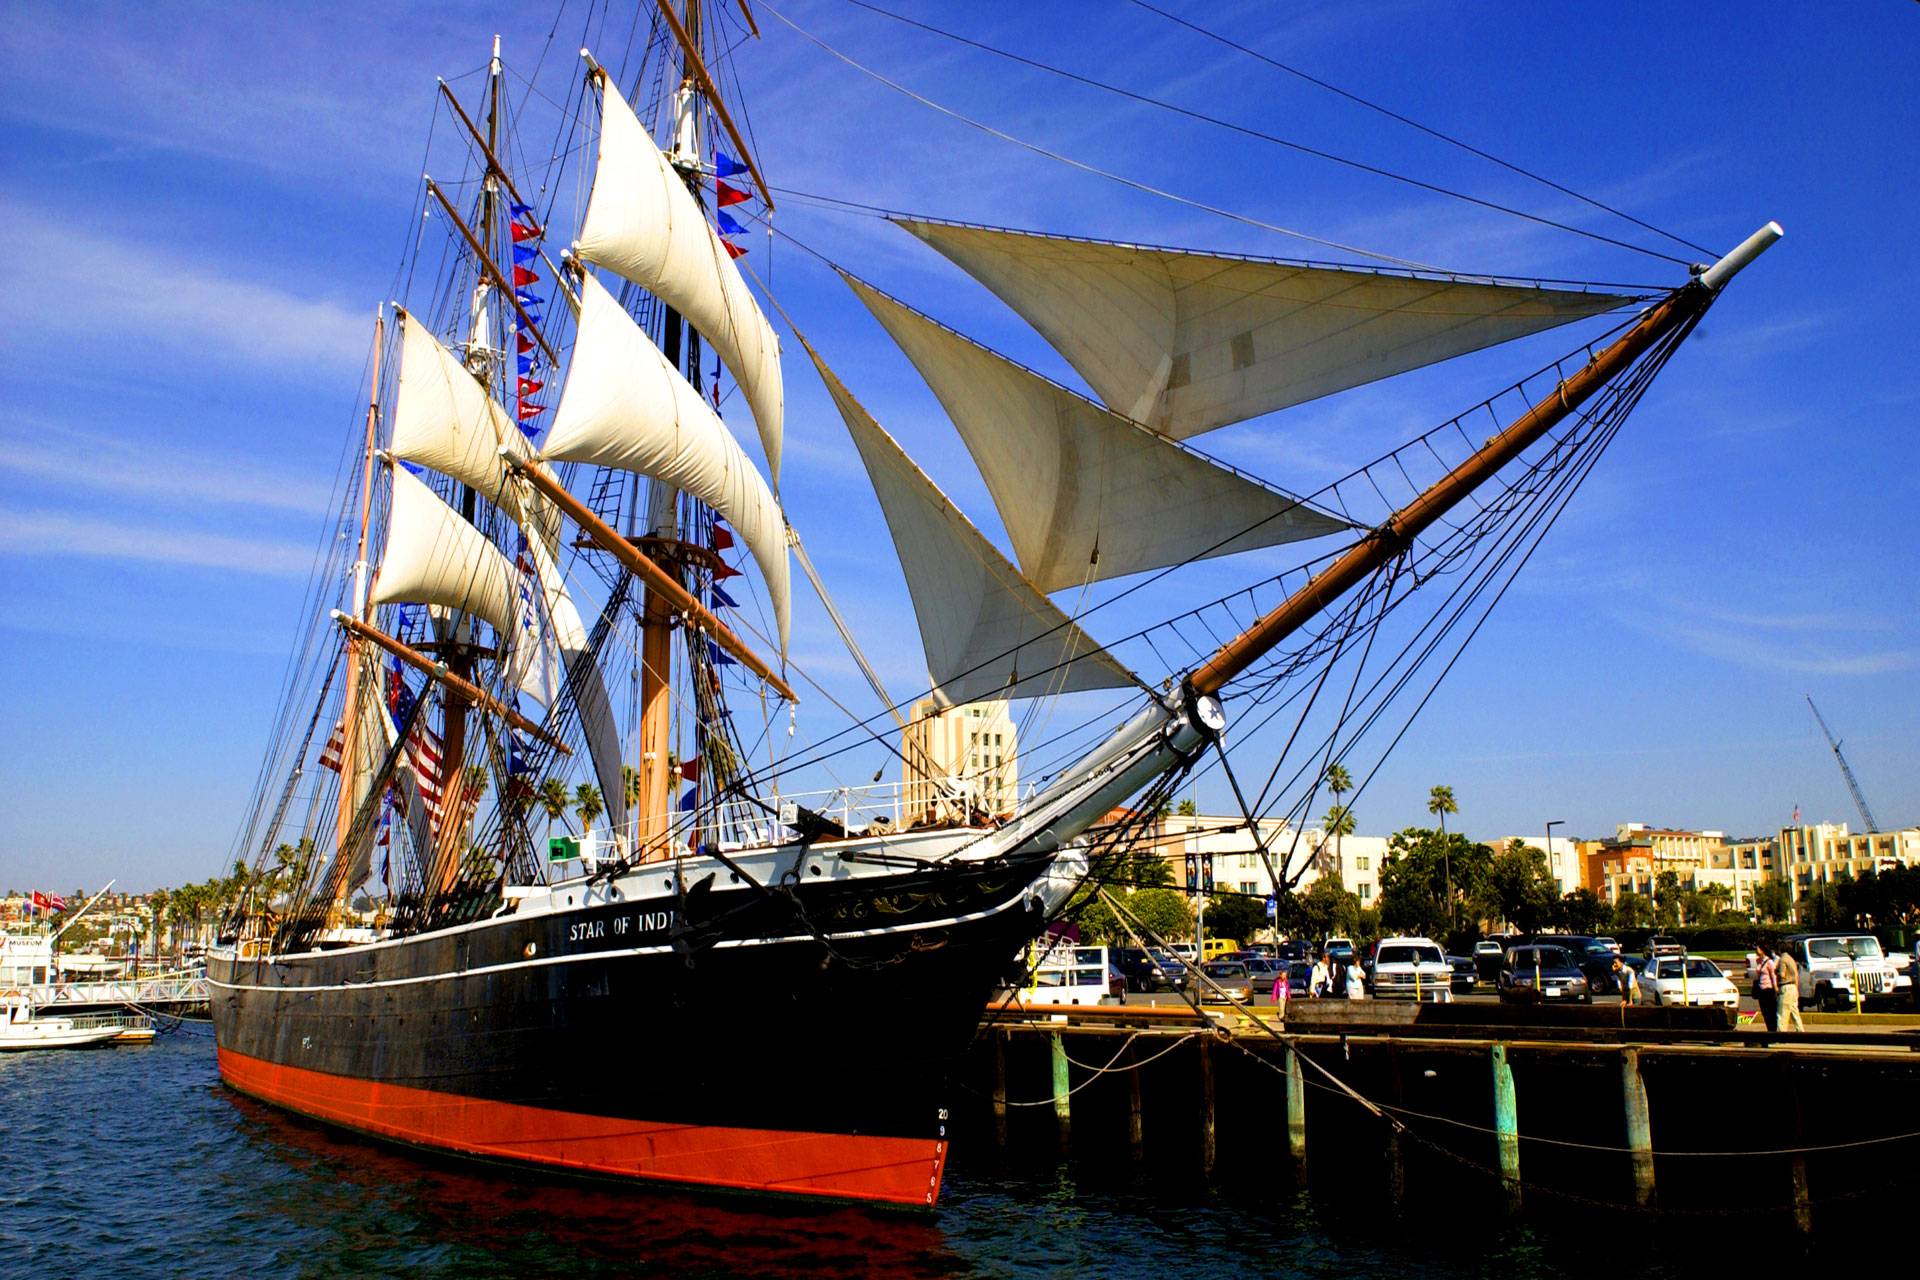 Restore, maintain & operate historic vessels